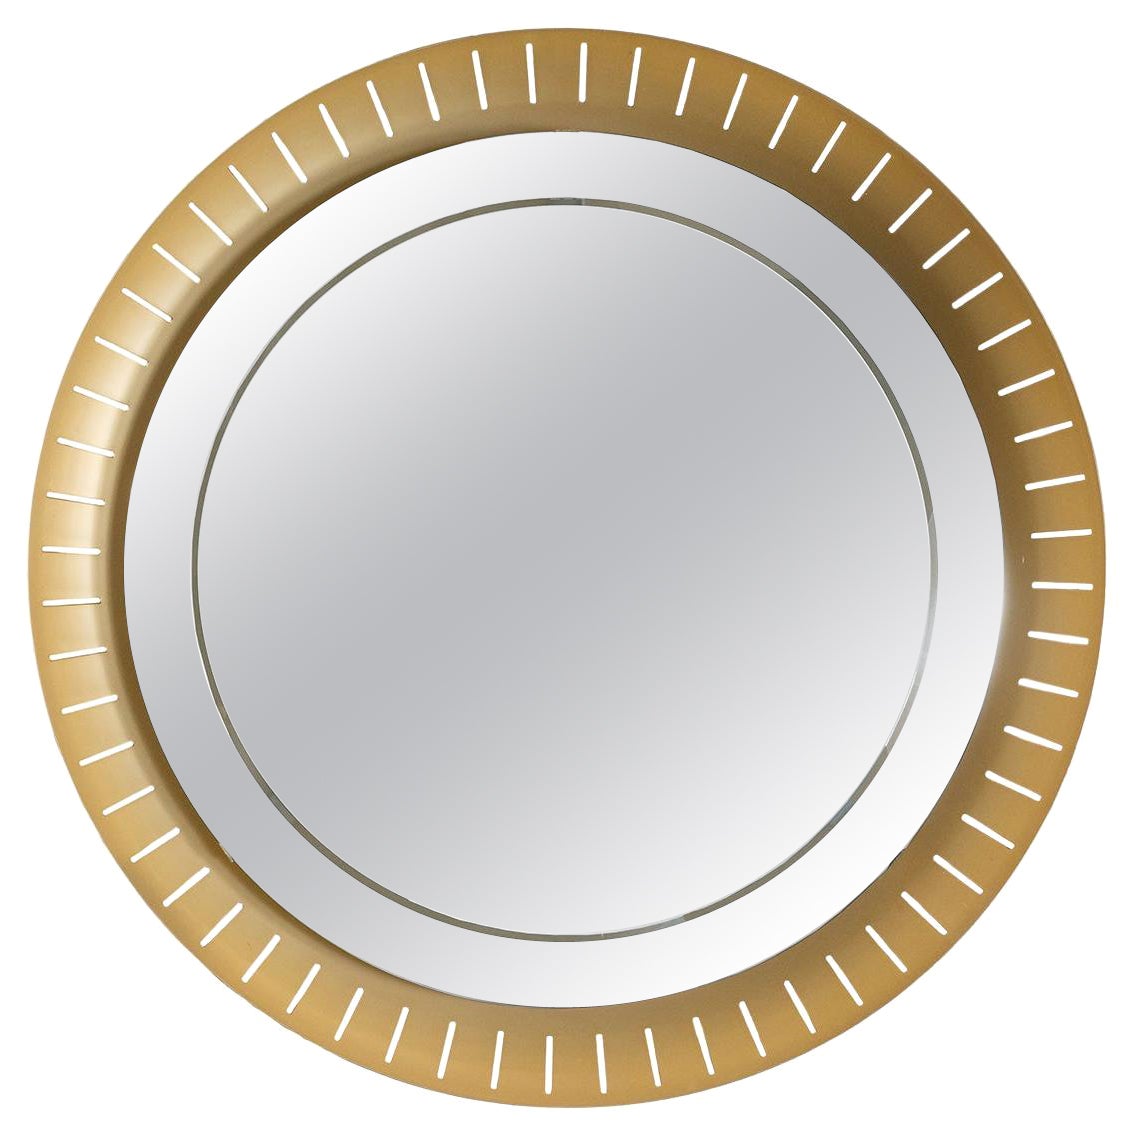 Perforated Brass Backlit Mirror by Hillebrand